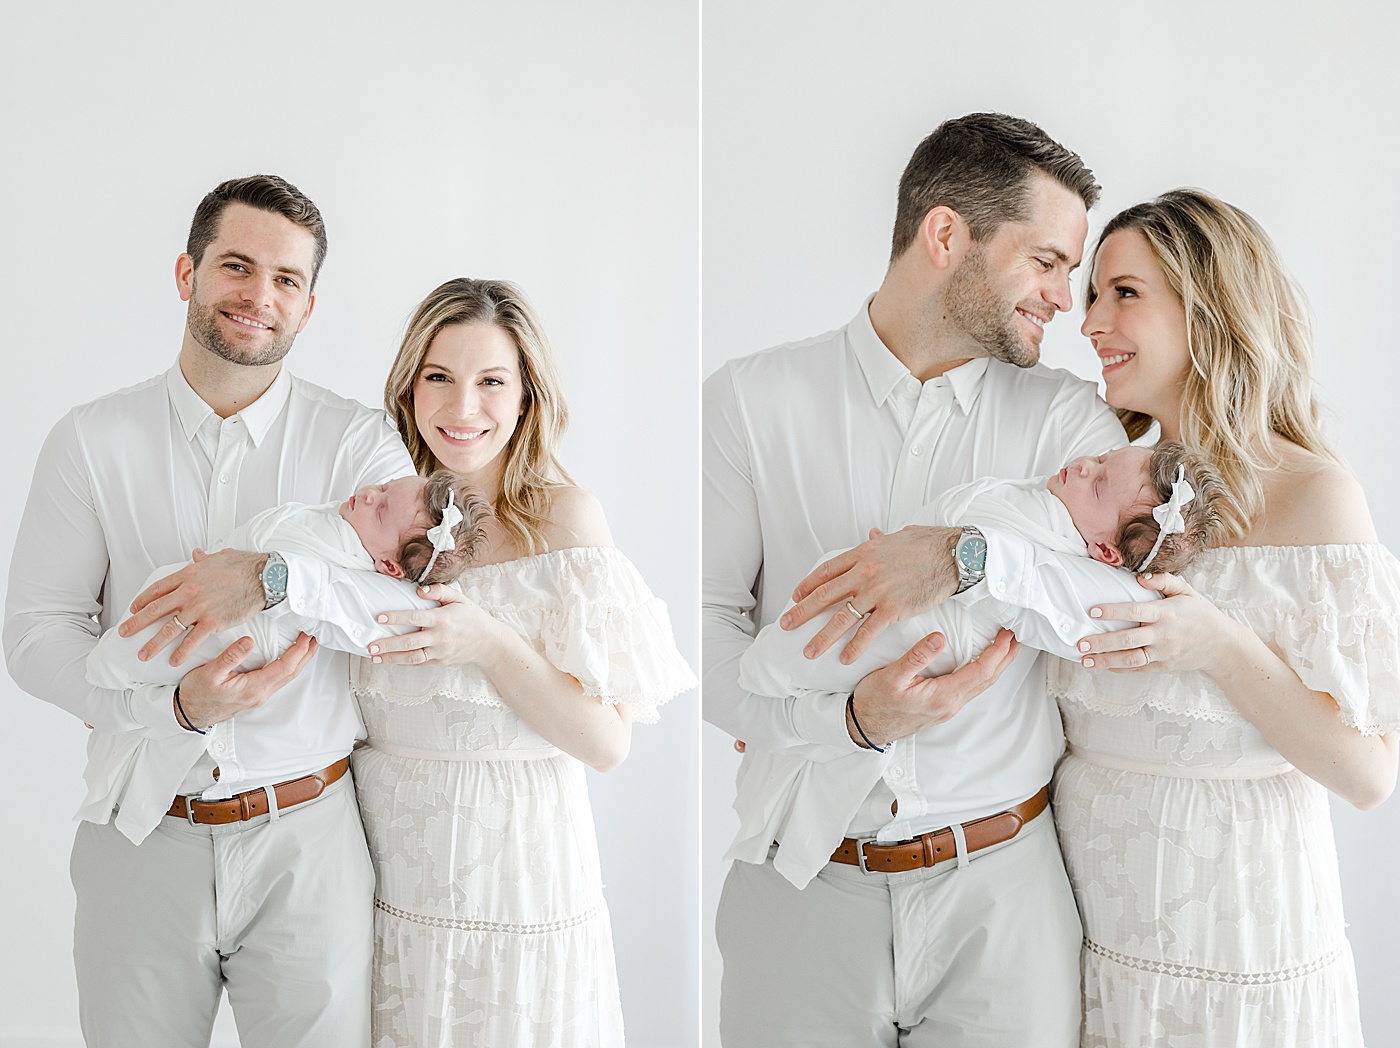 Studio newborn session for first-time parents and baby girl | Kristin Wood Photography